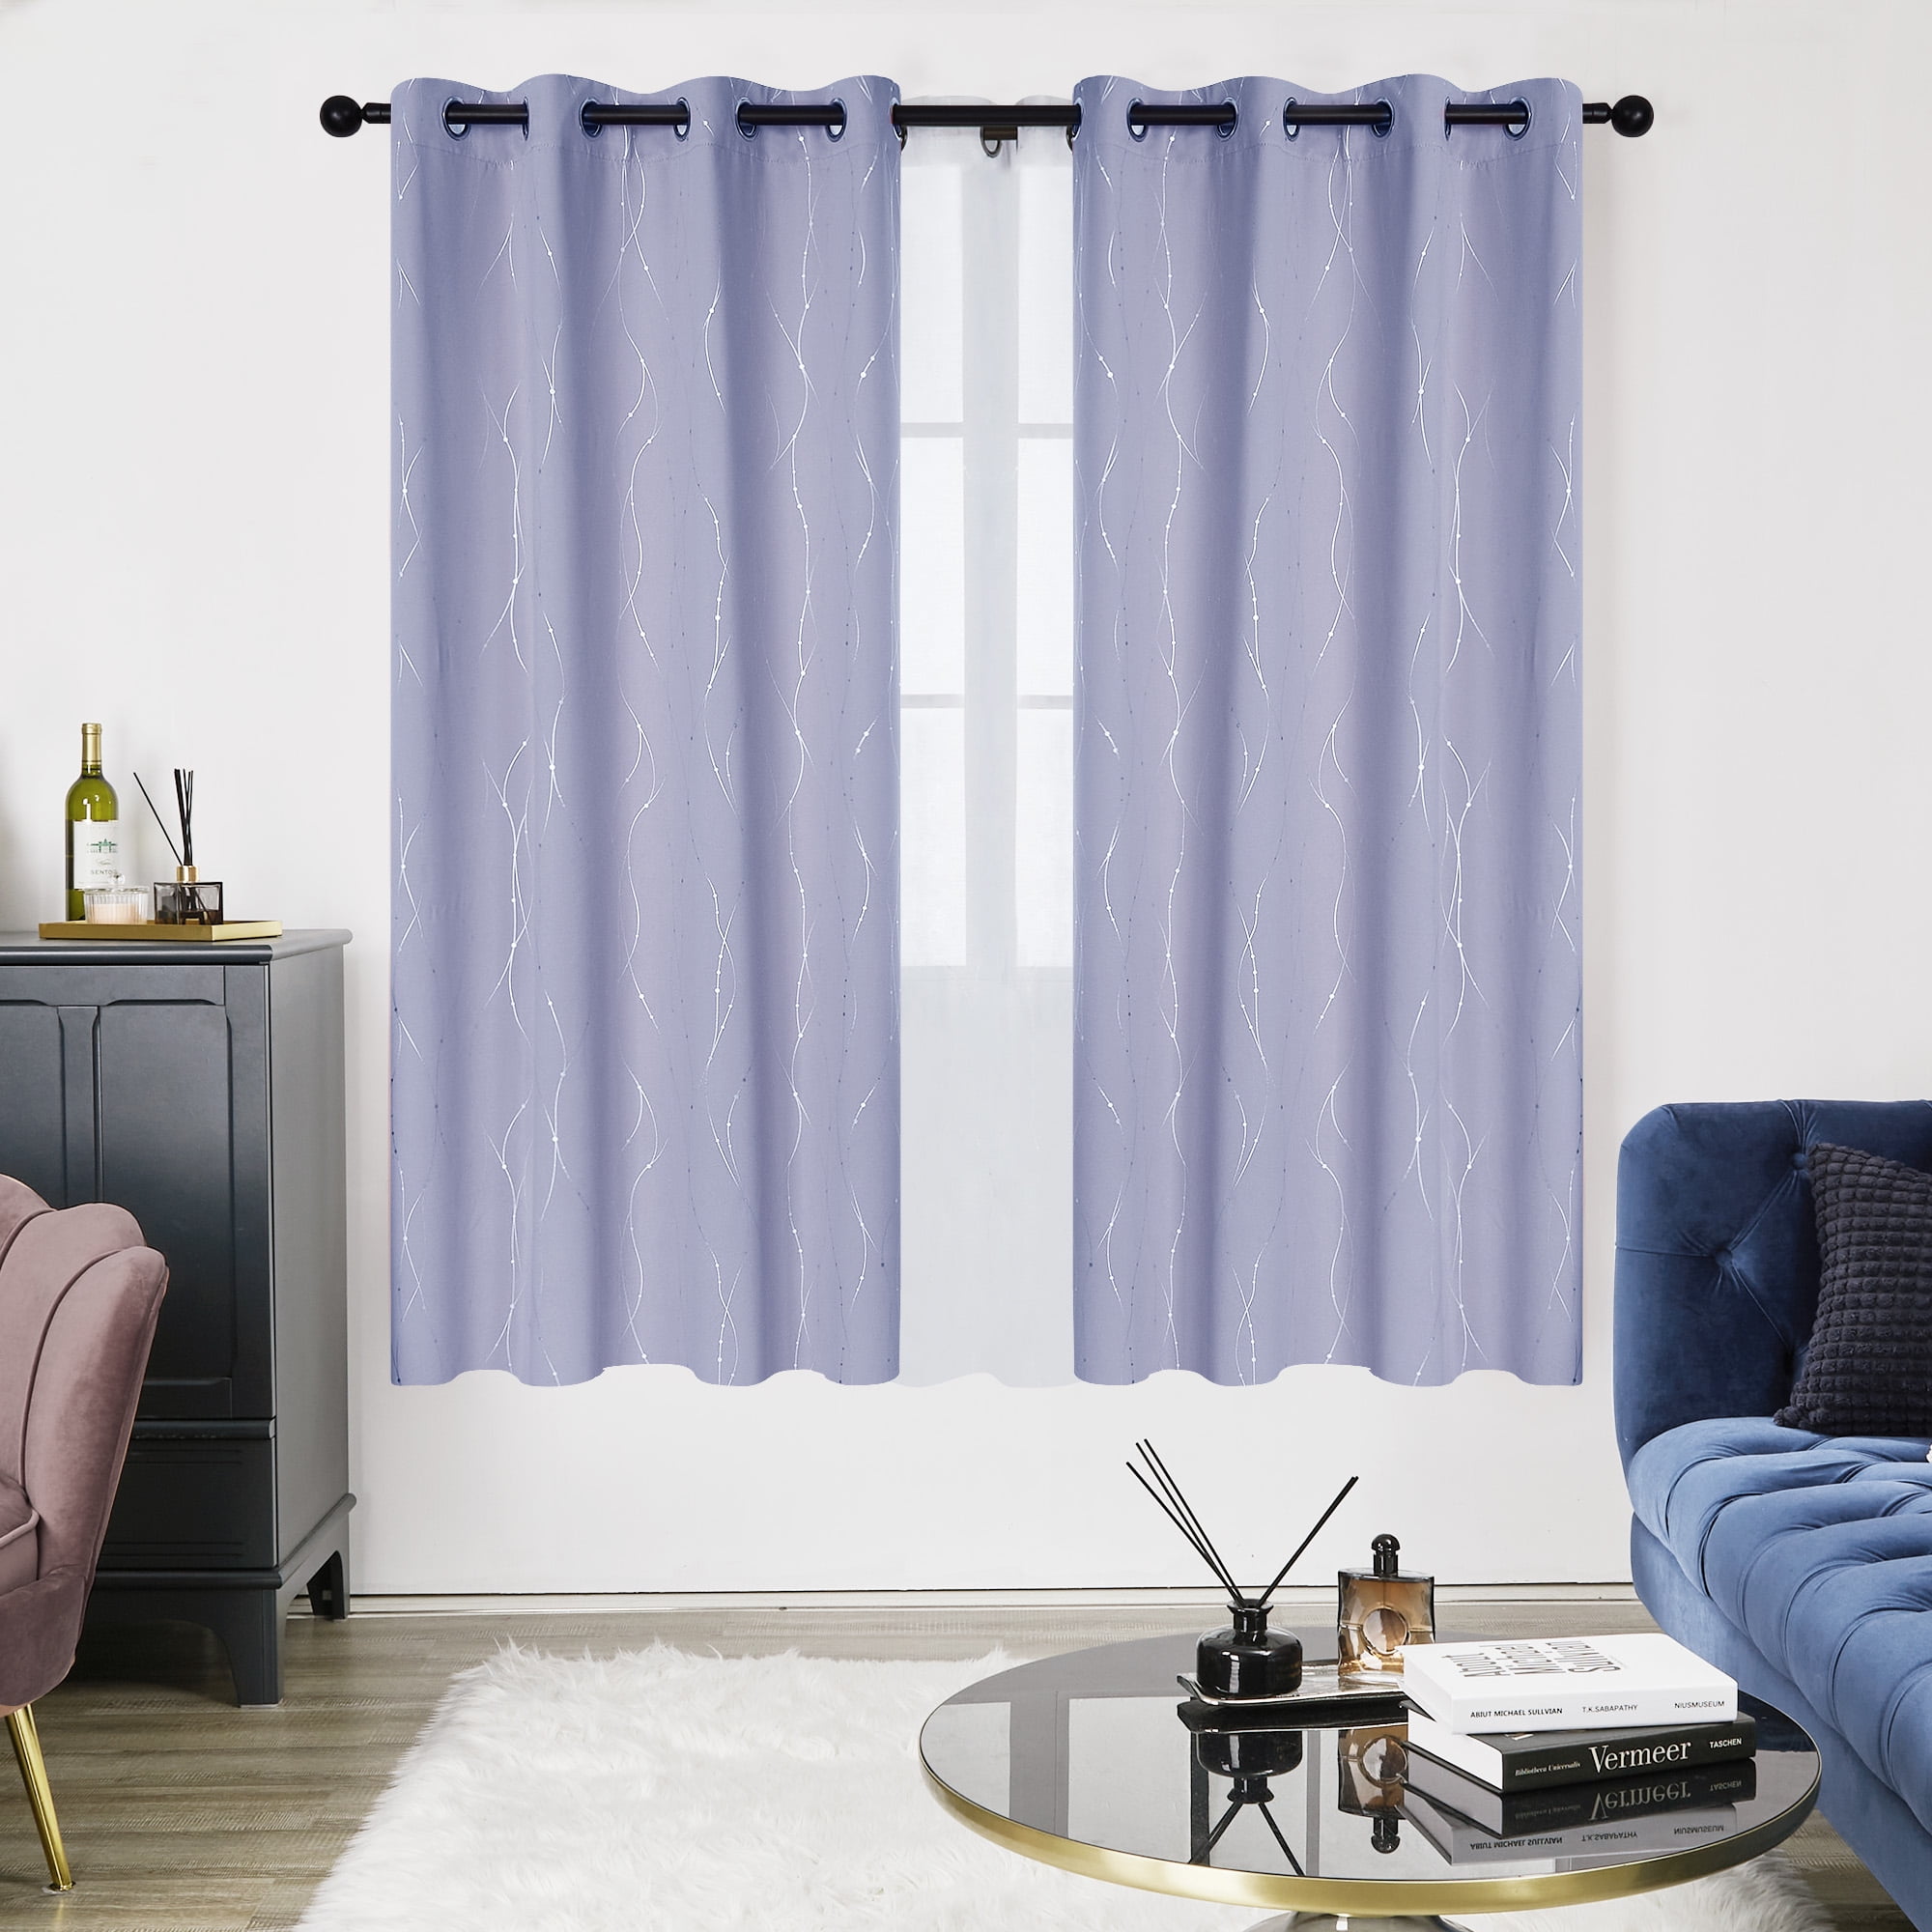 Details about   2PC ROOM DARKENING INSULATED BLACKOUT WINDOW CURTAIN PANEL 70"W X 63"L TOGETHER 